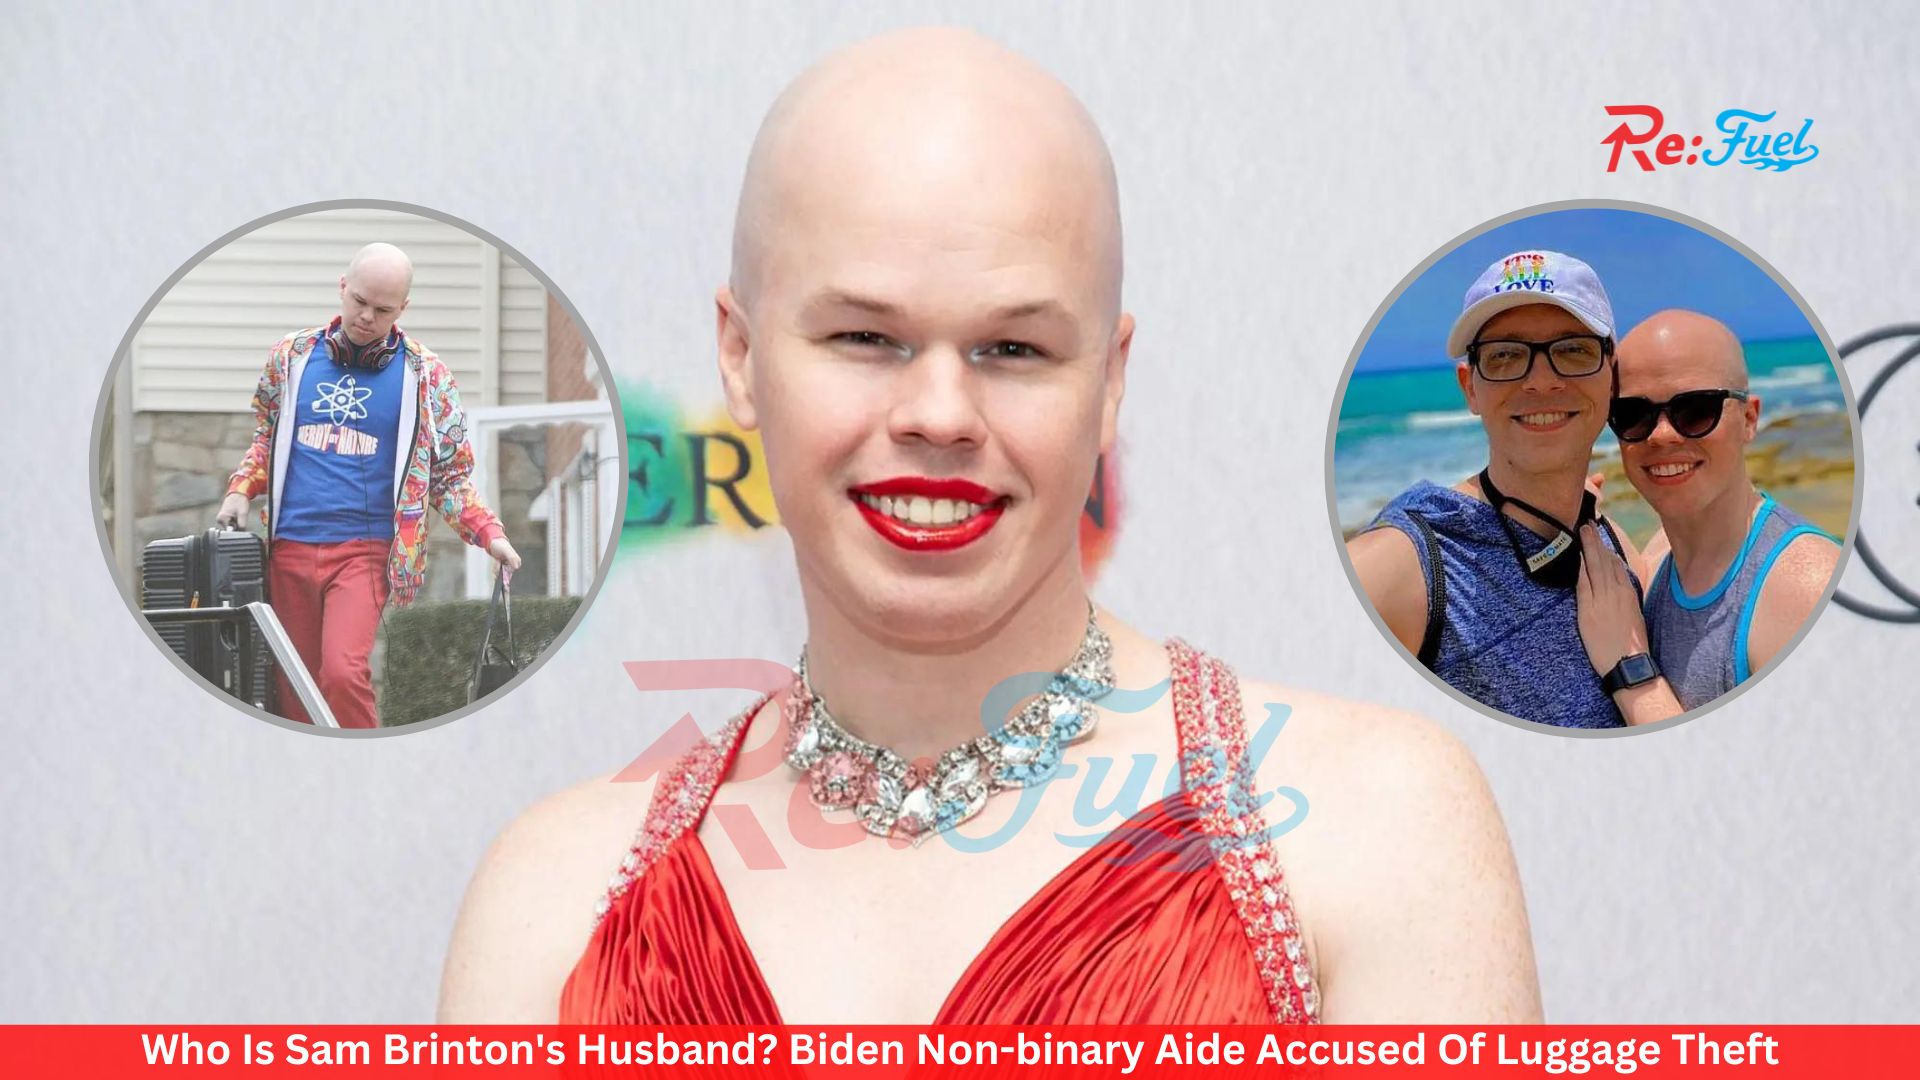 Who Is Sam Brinton's Husband? Biden Non-binary Aide Accused Of Luggage Theft